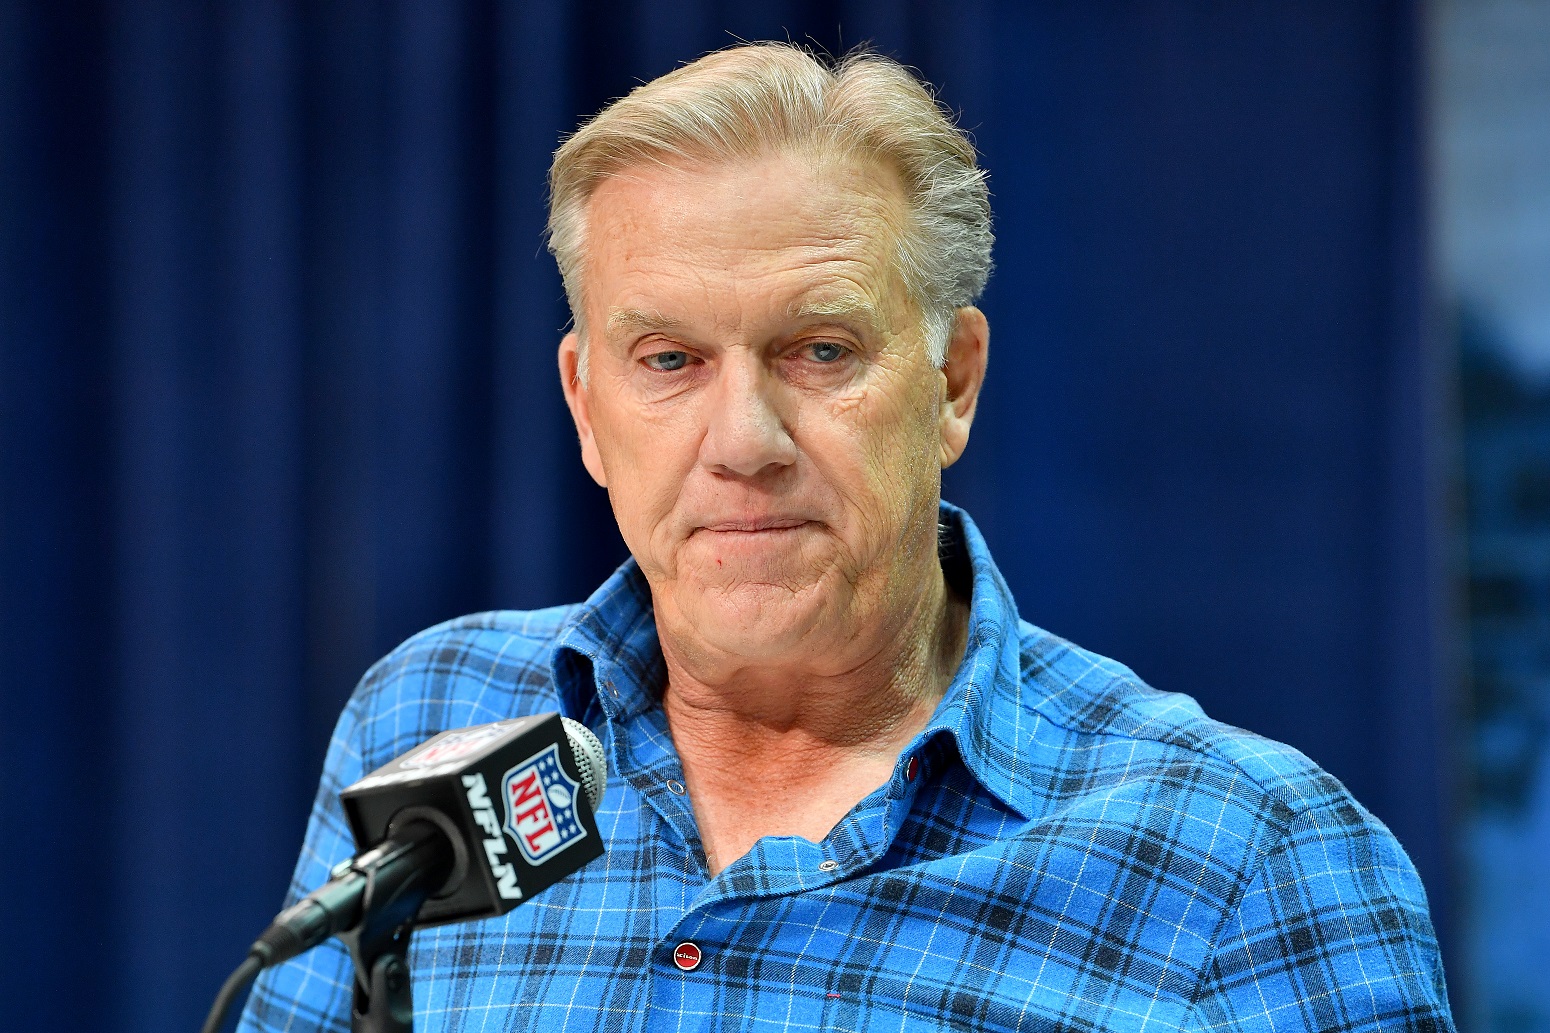 John Elway Doesn’t Go Full Mike Dikta When Discussing the National Anthem